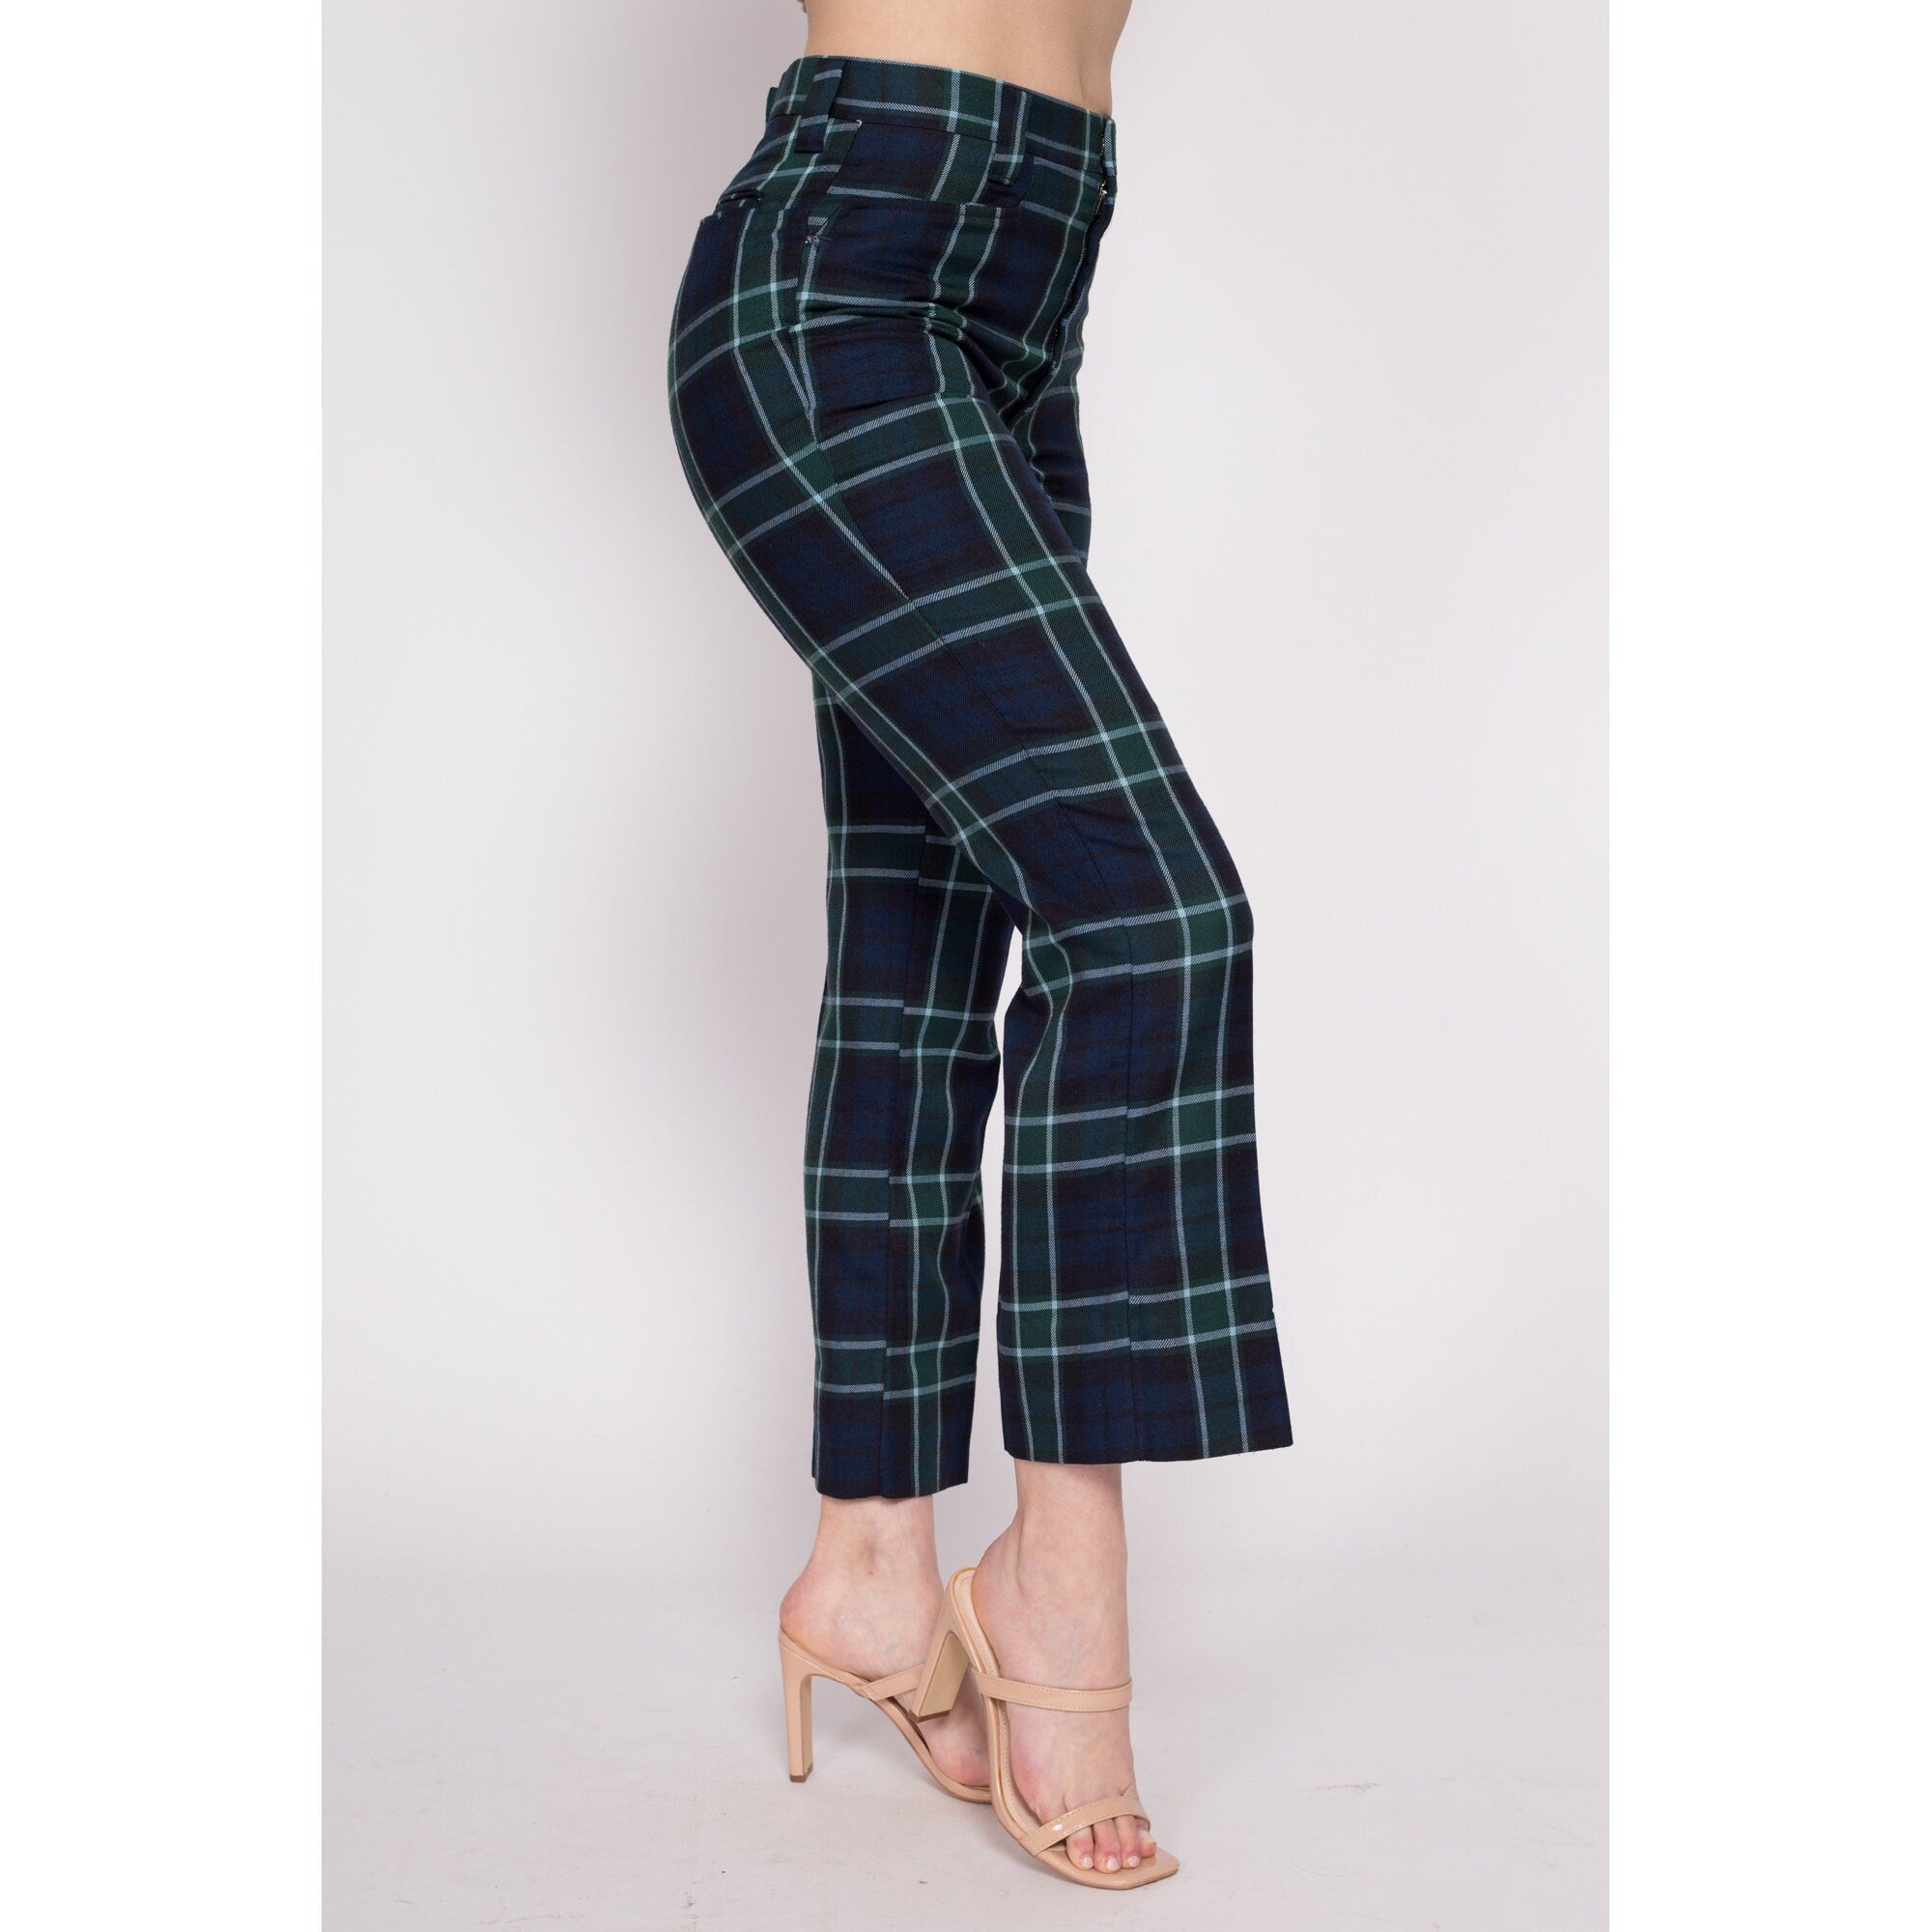 Good Life of Design: A FASHION POST: How To Wear Plaid Pants